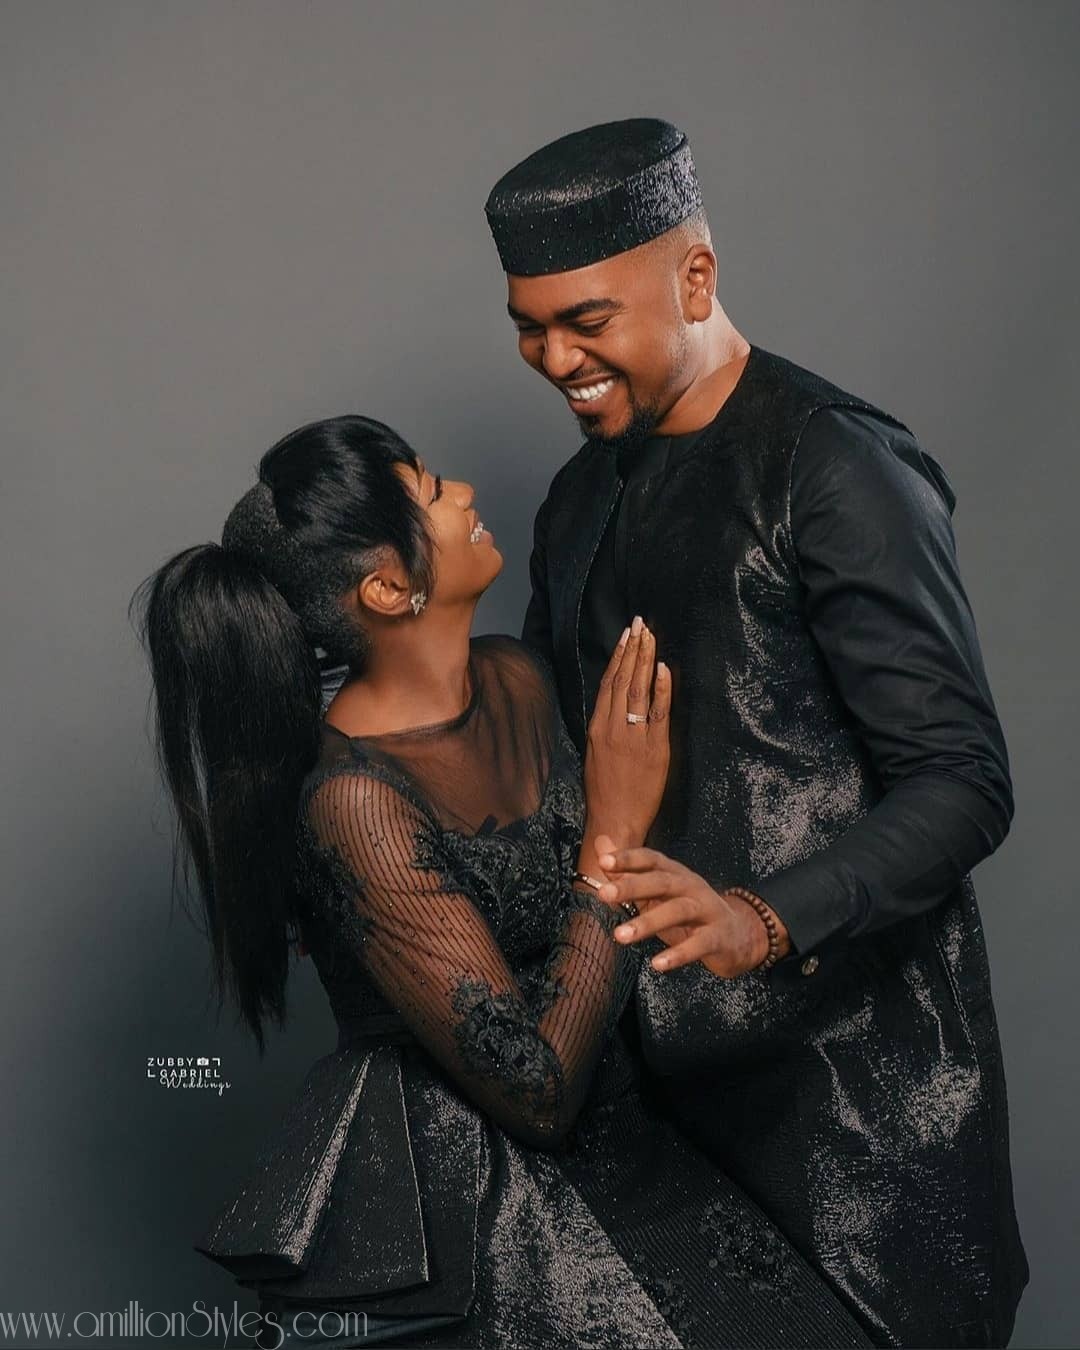 Can You Wear Black Matching Outfits For Your Pre-Wedding Photos?